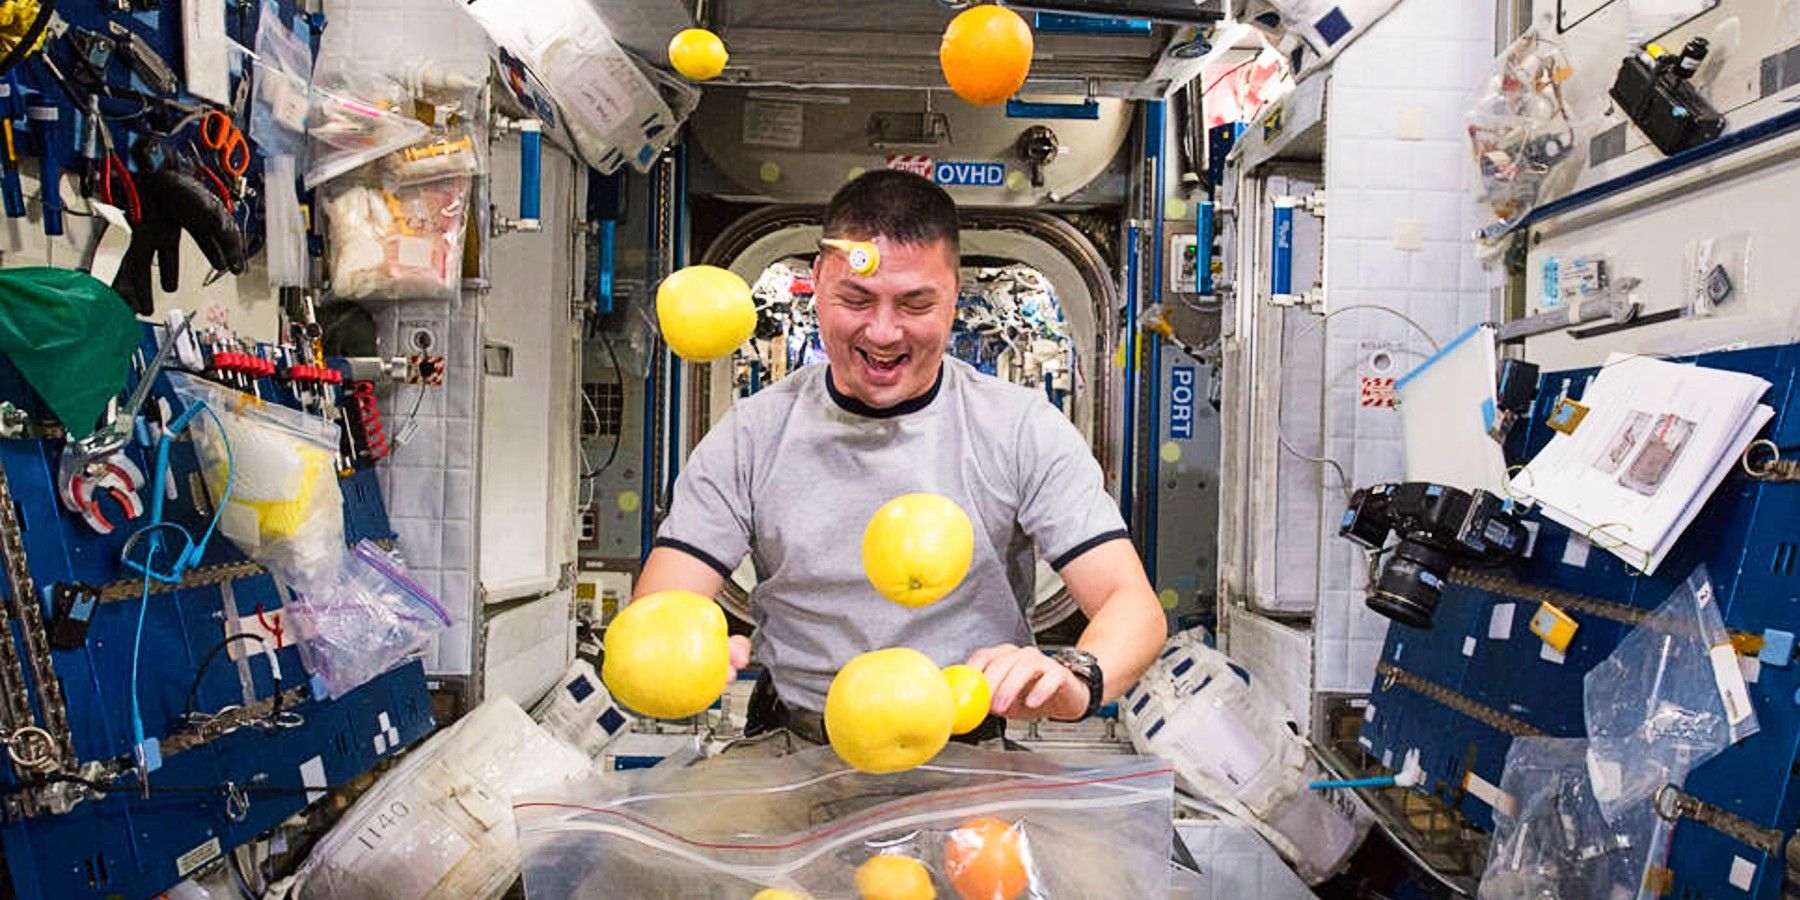 NASA Astronaut Plays With Fruits In The ISS